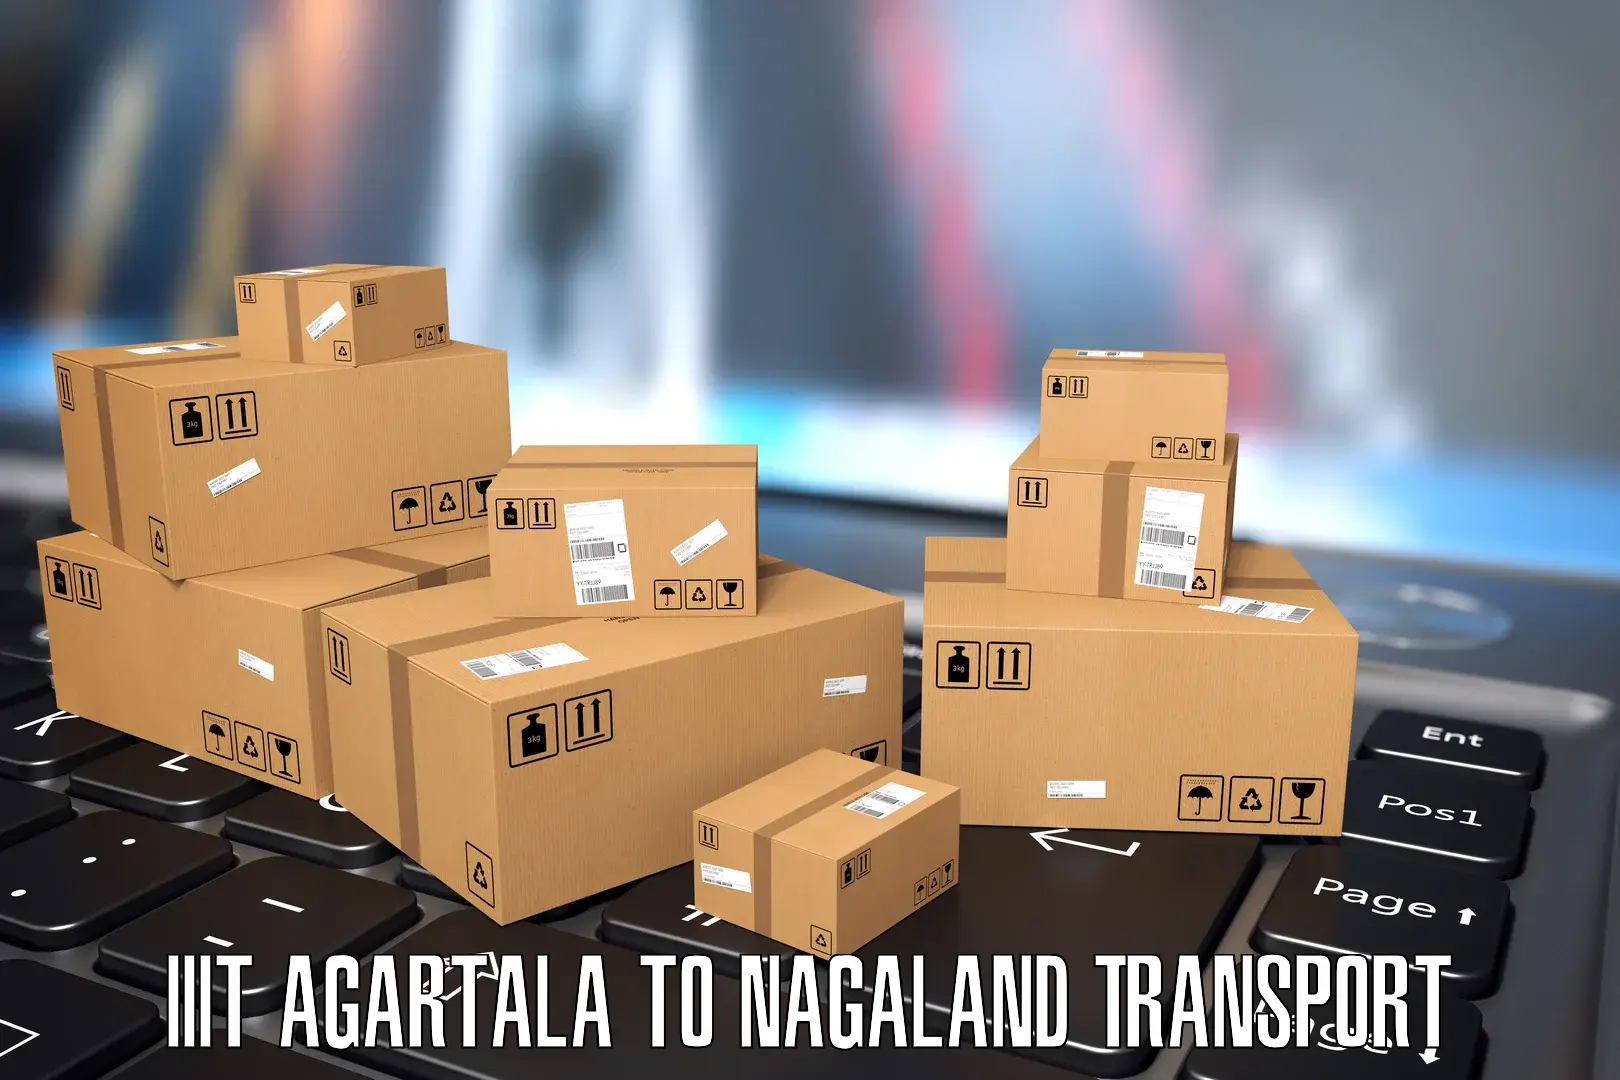 Container transport service IIIT Agartala to Nagaland